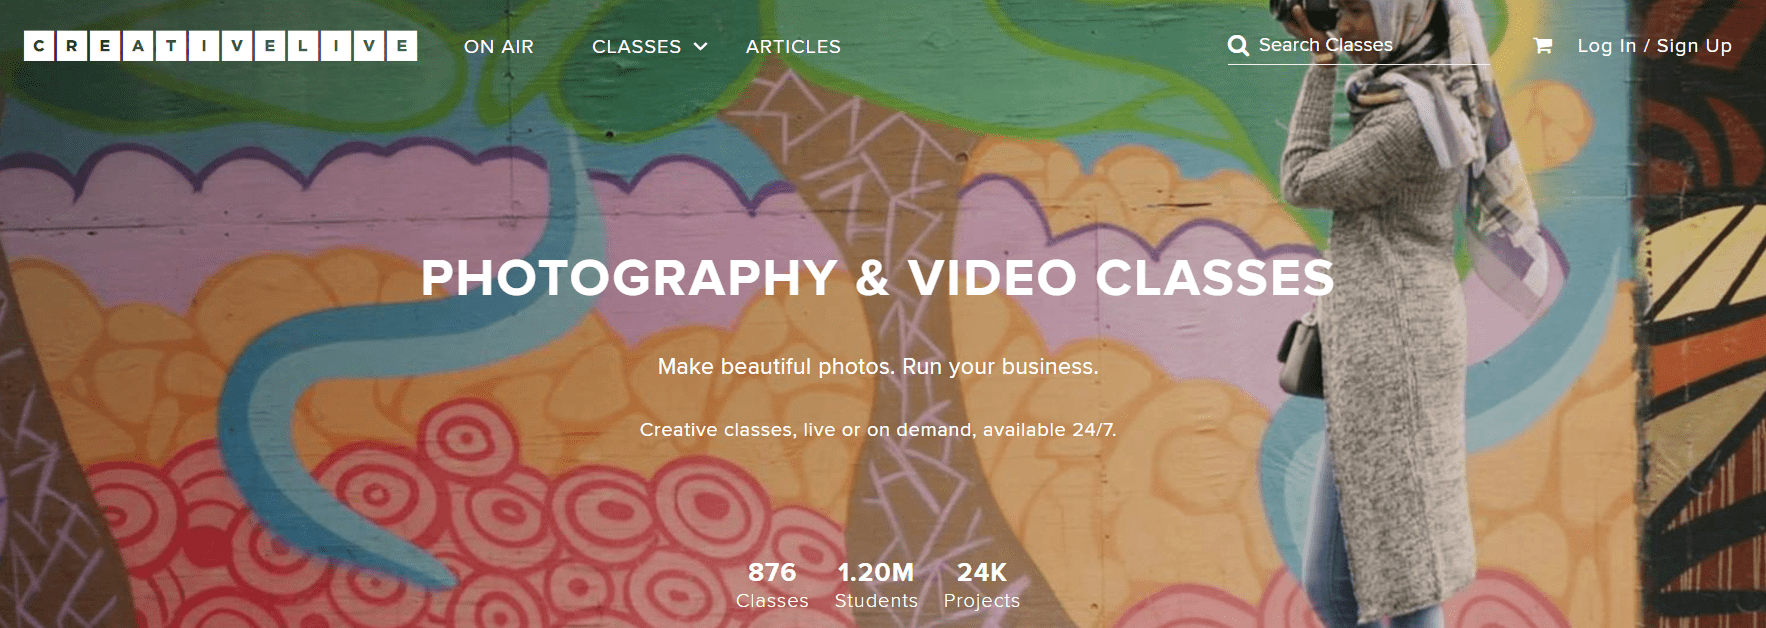 CreativeLive's List of Photography & Videography Classes